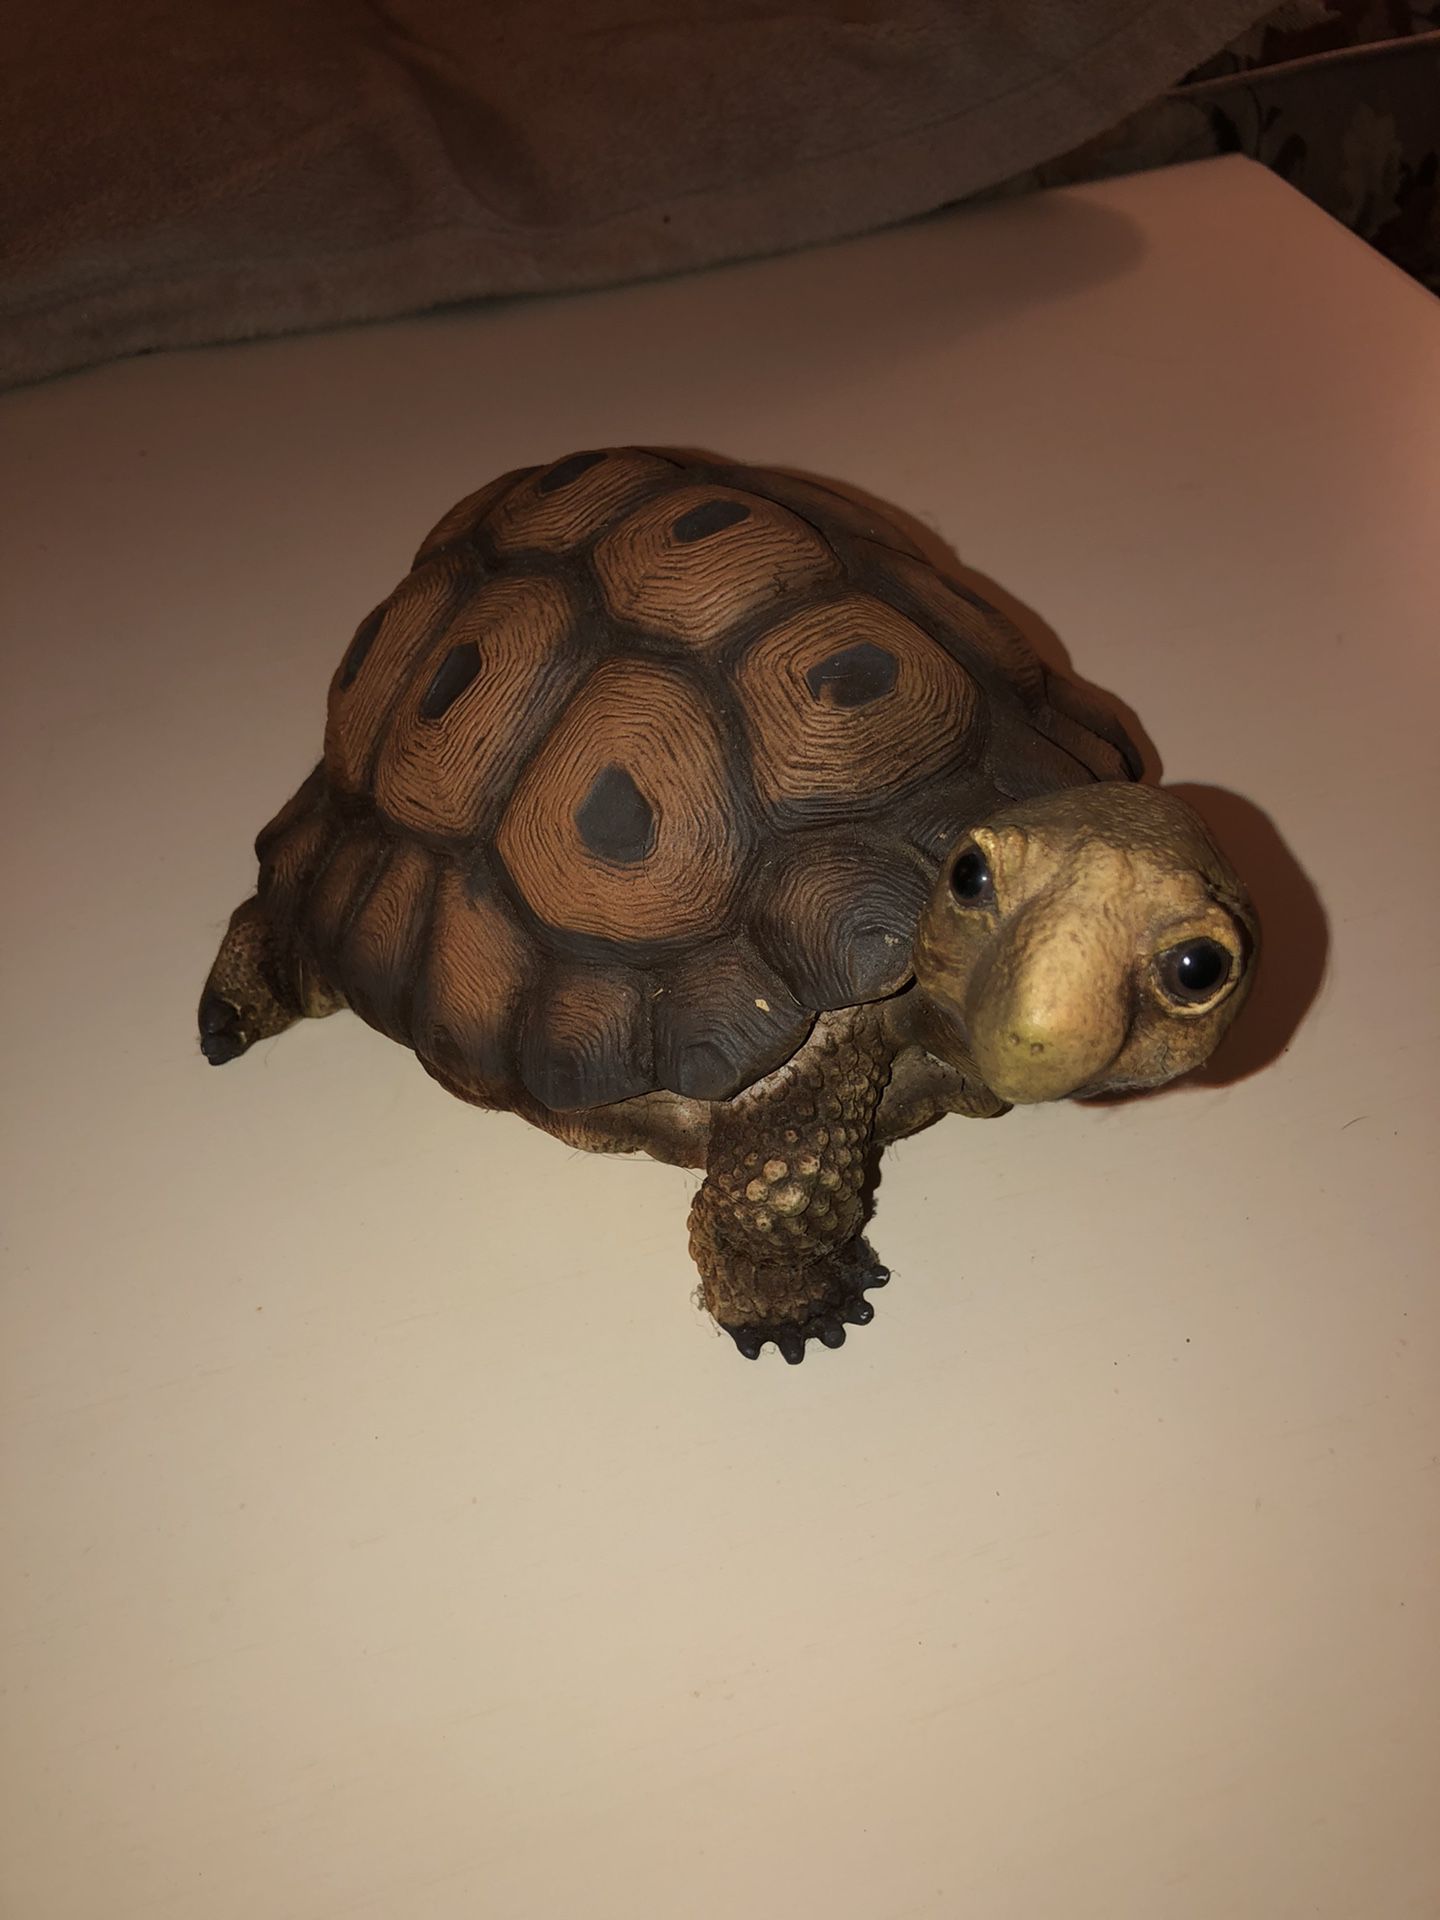 Decorative NOT REAL turtle 